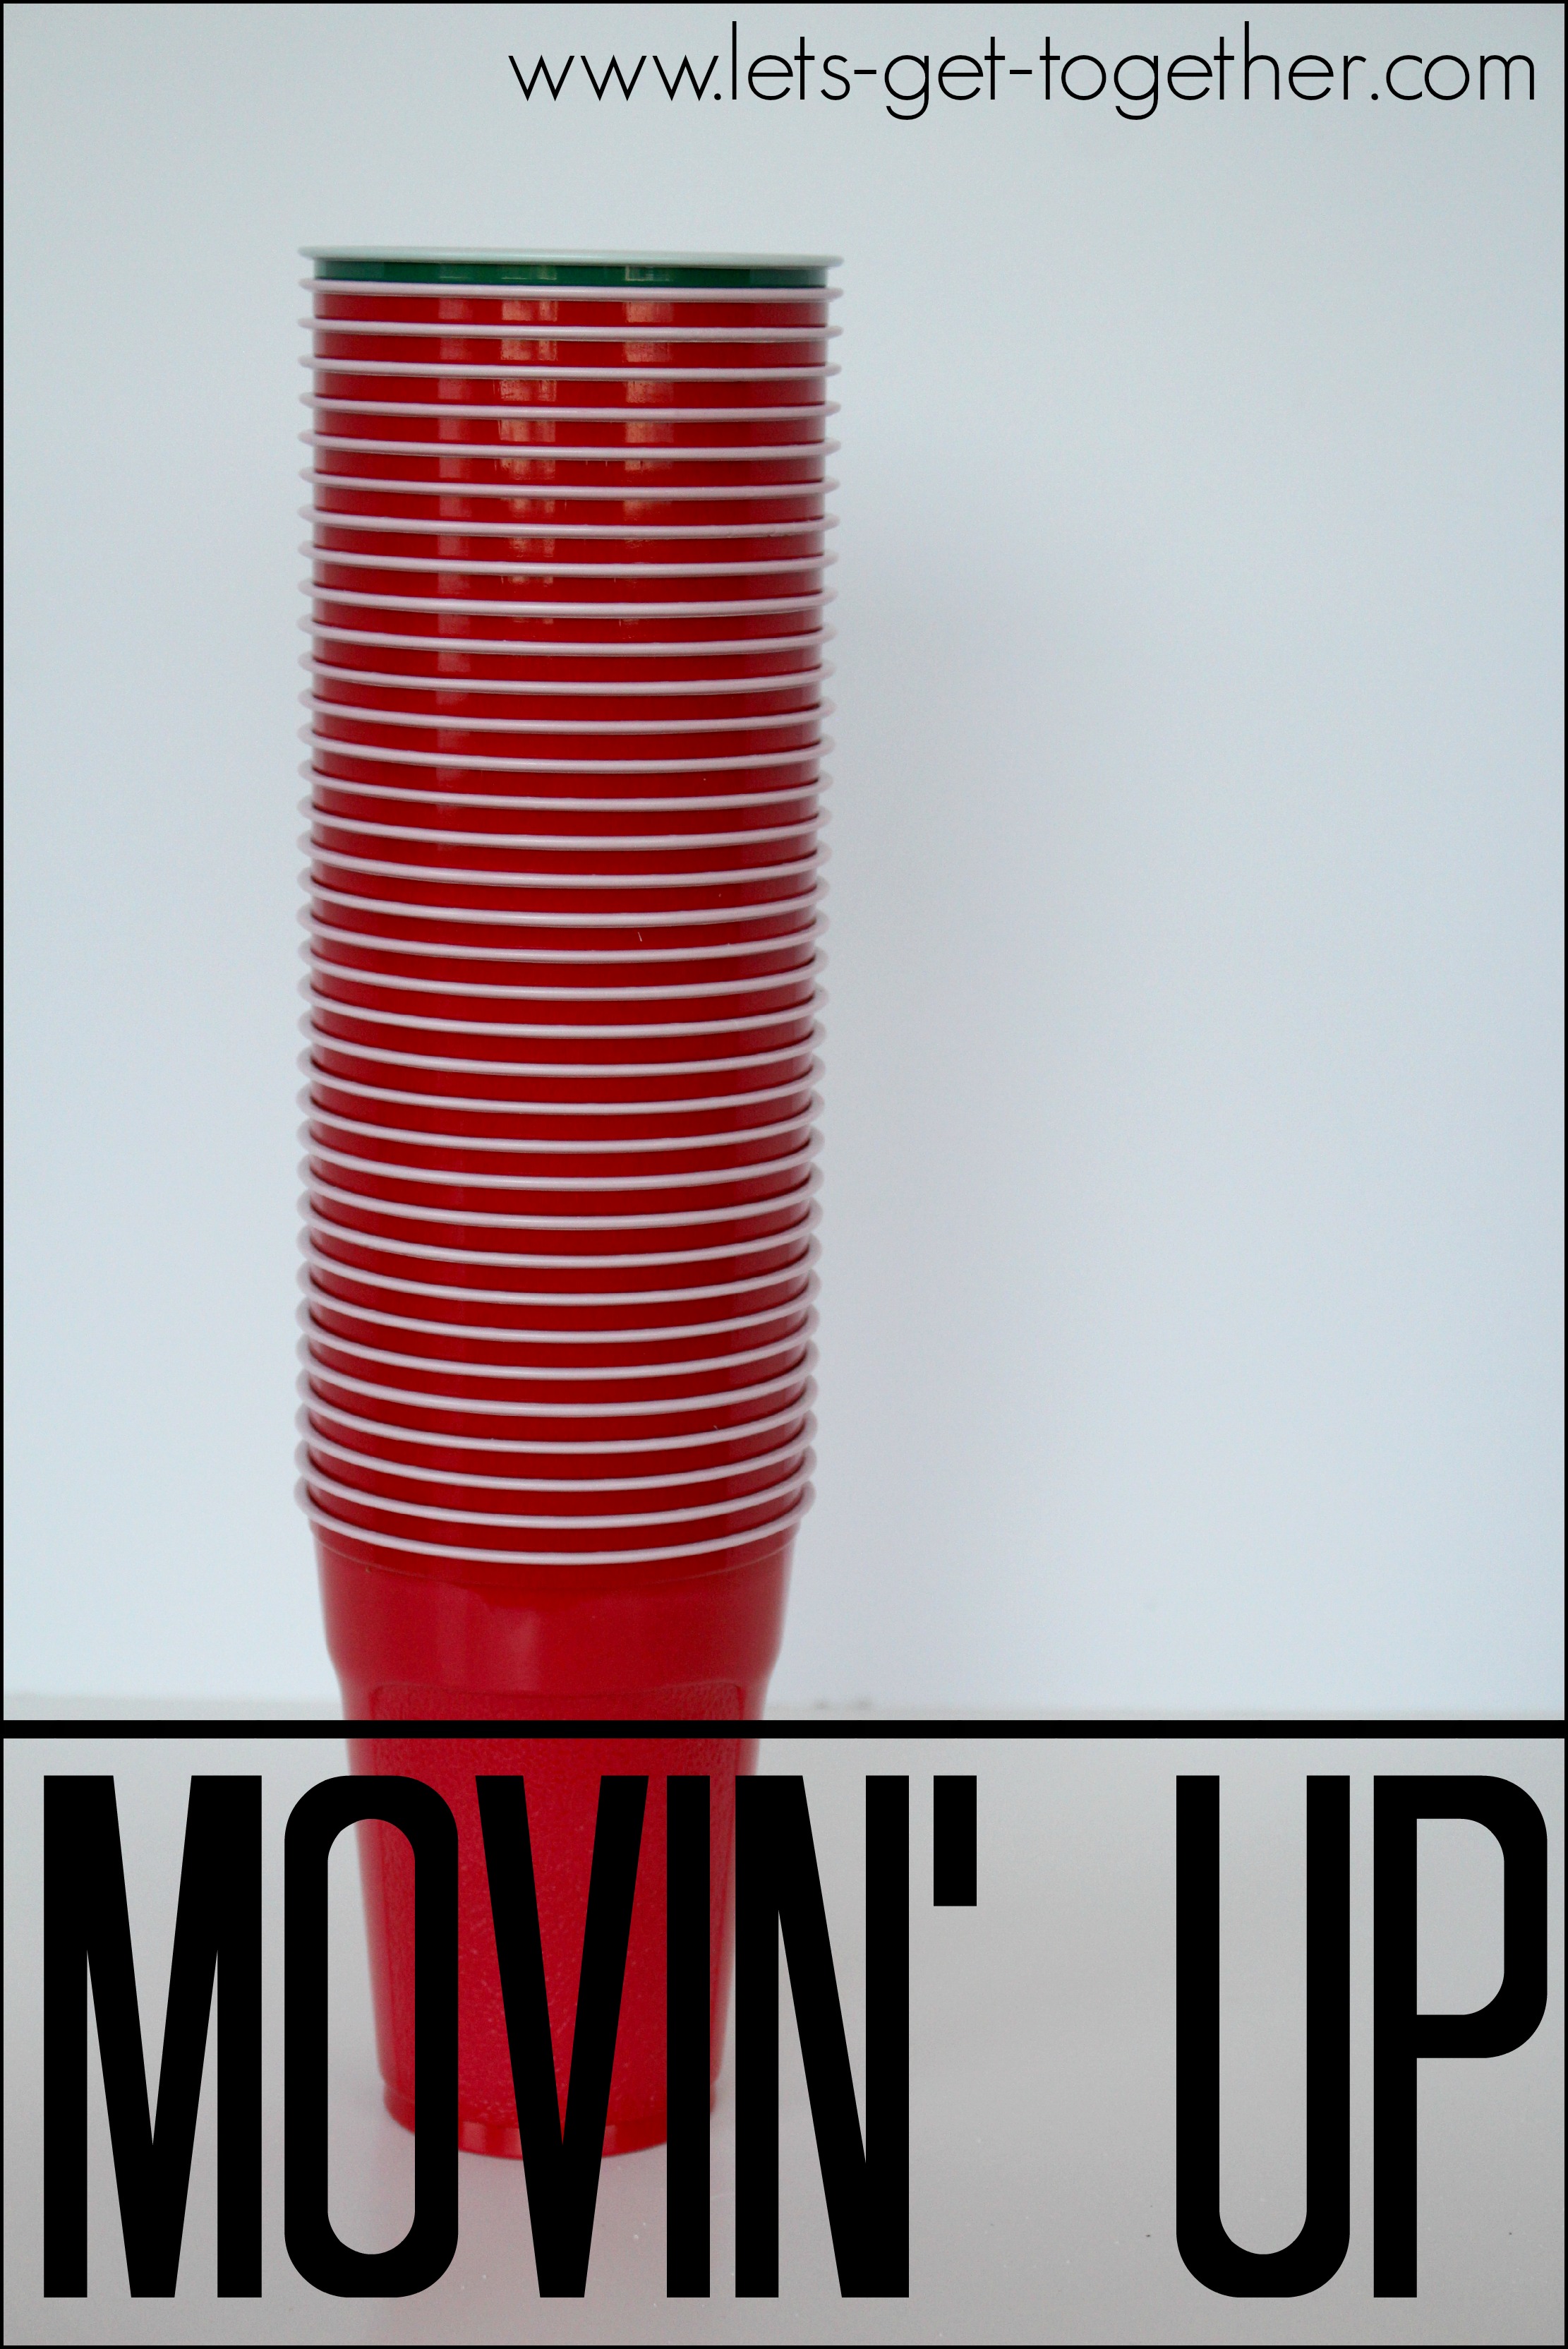 5 Minute to Win It Games using Plastic Cups • Keeping it ...